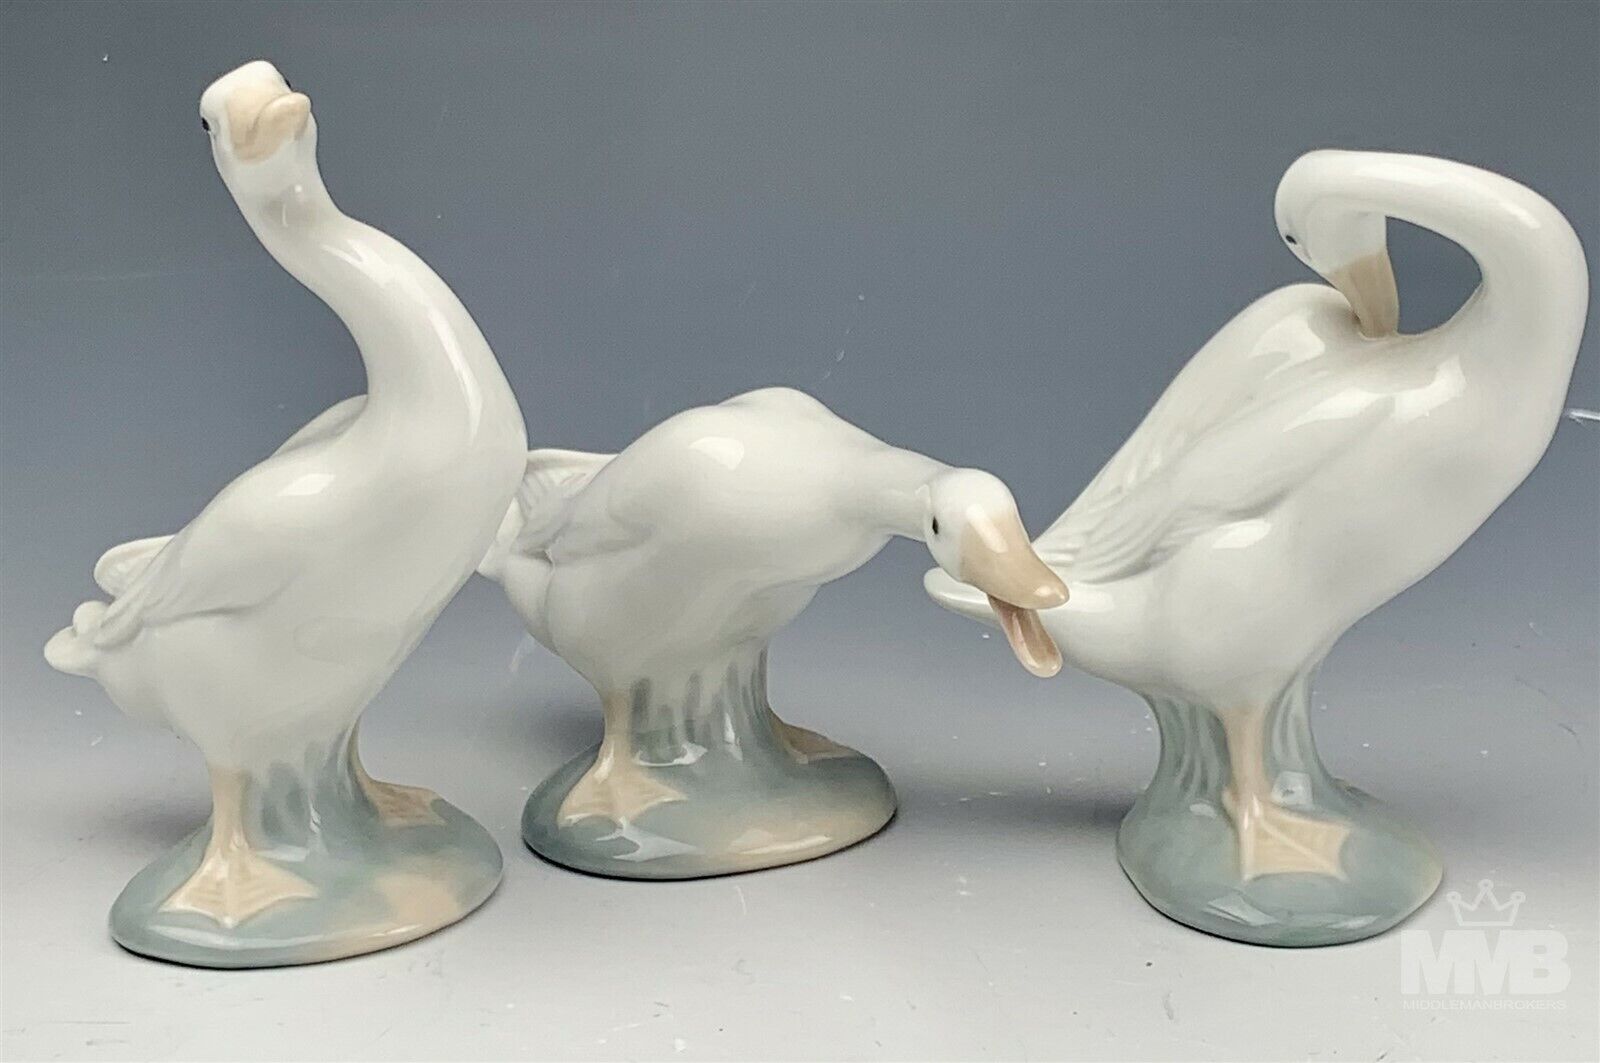 VTG Lot of 3 Retired Lladro Spain Painted Signed Porcelain Duck Figurines  NR SMS for Sale - Fleetwoodmac.net